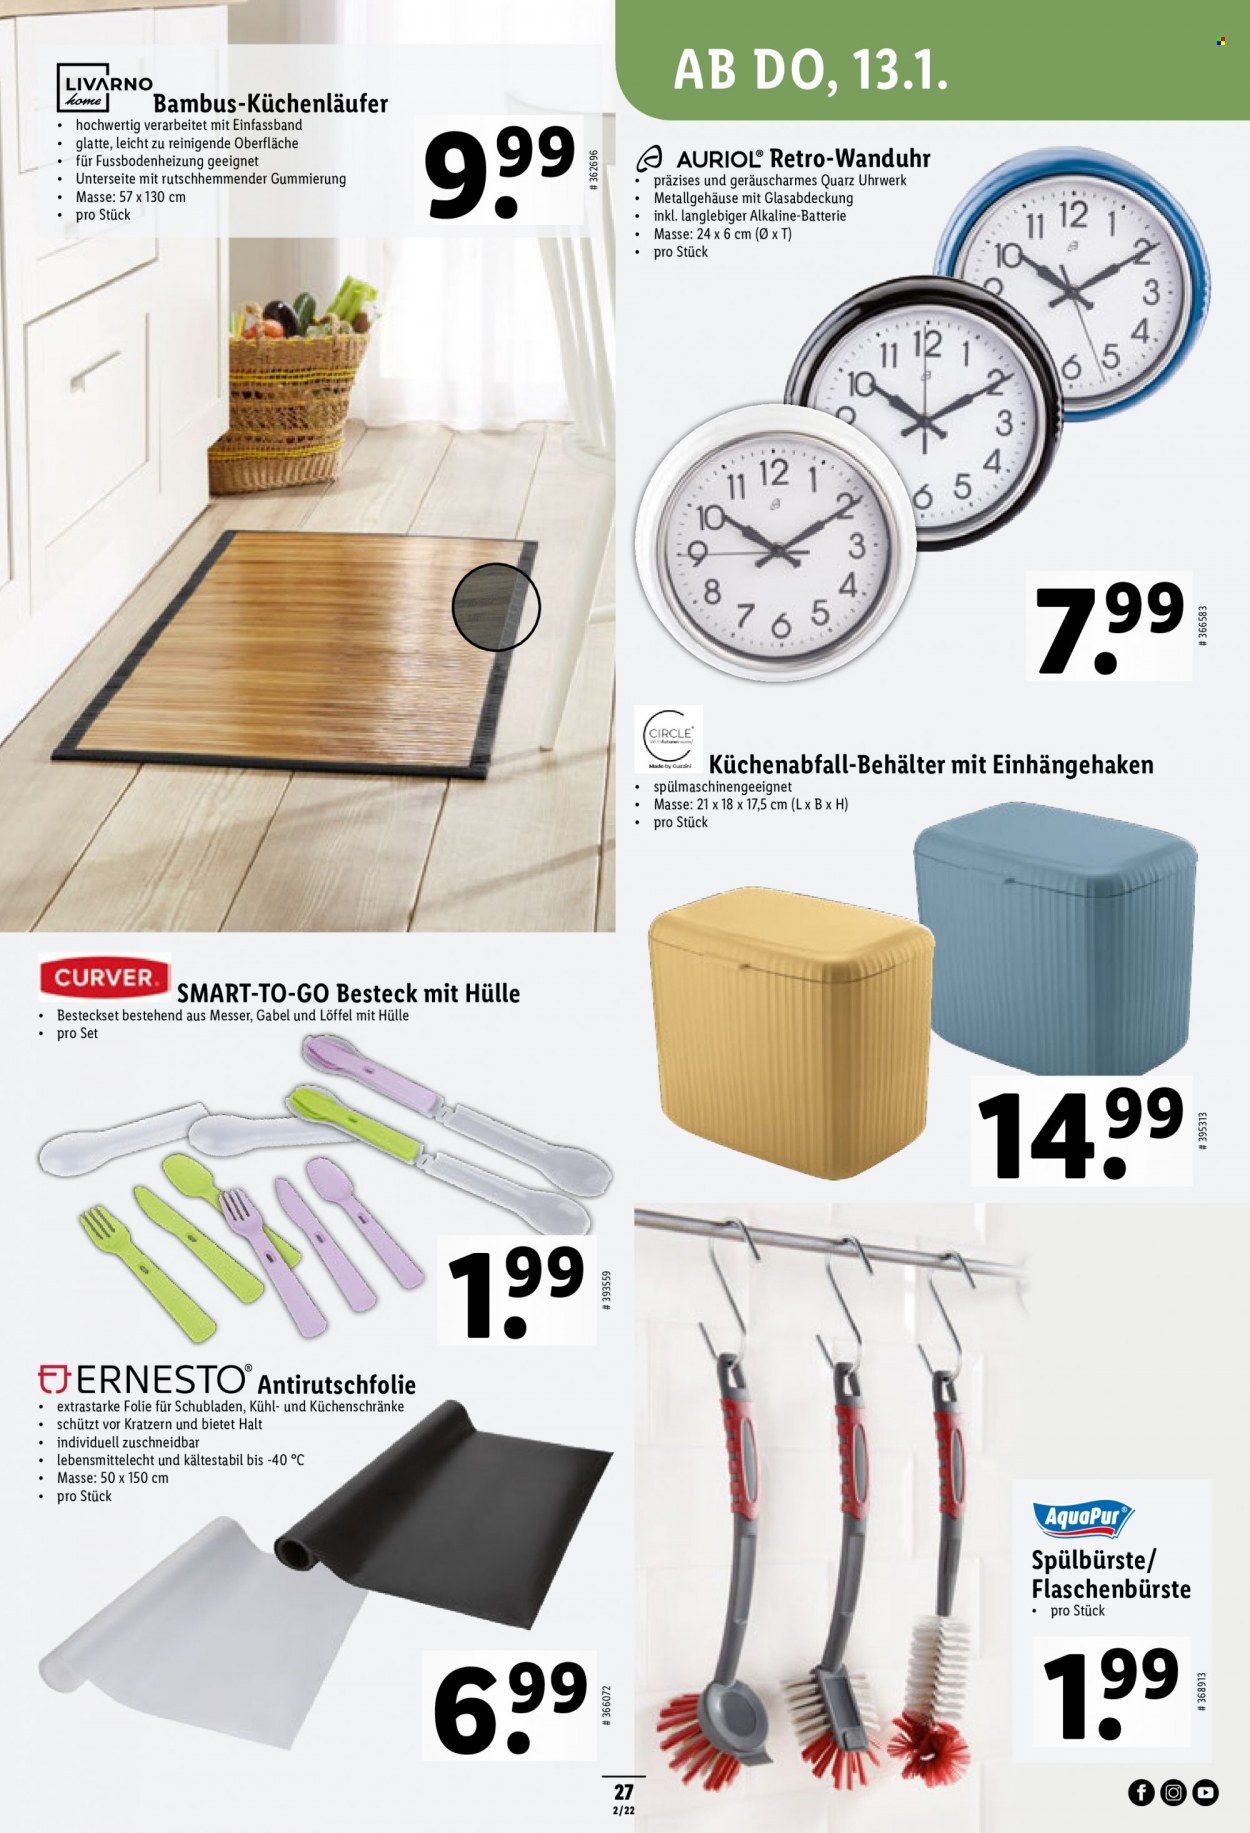 Catalogue Lidl - 13.1.2022 - 19.1.2022. Page 27.